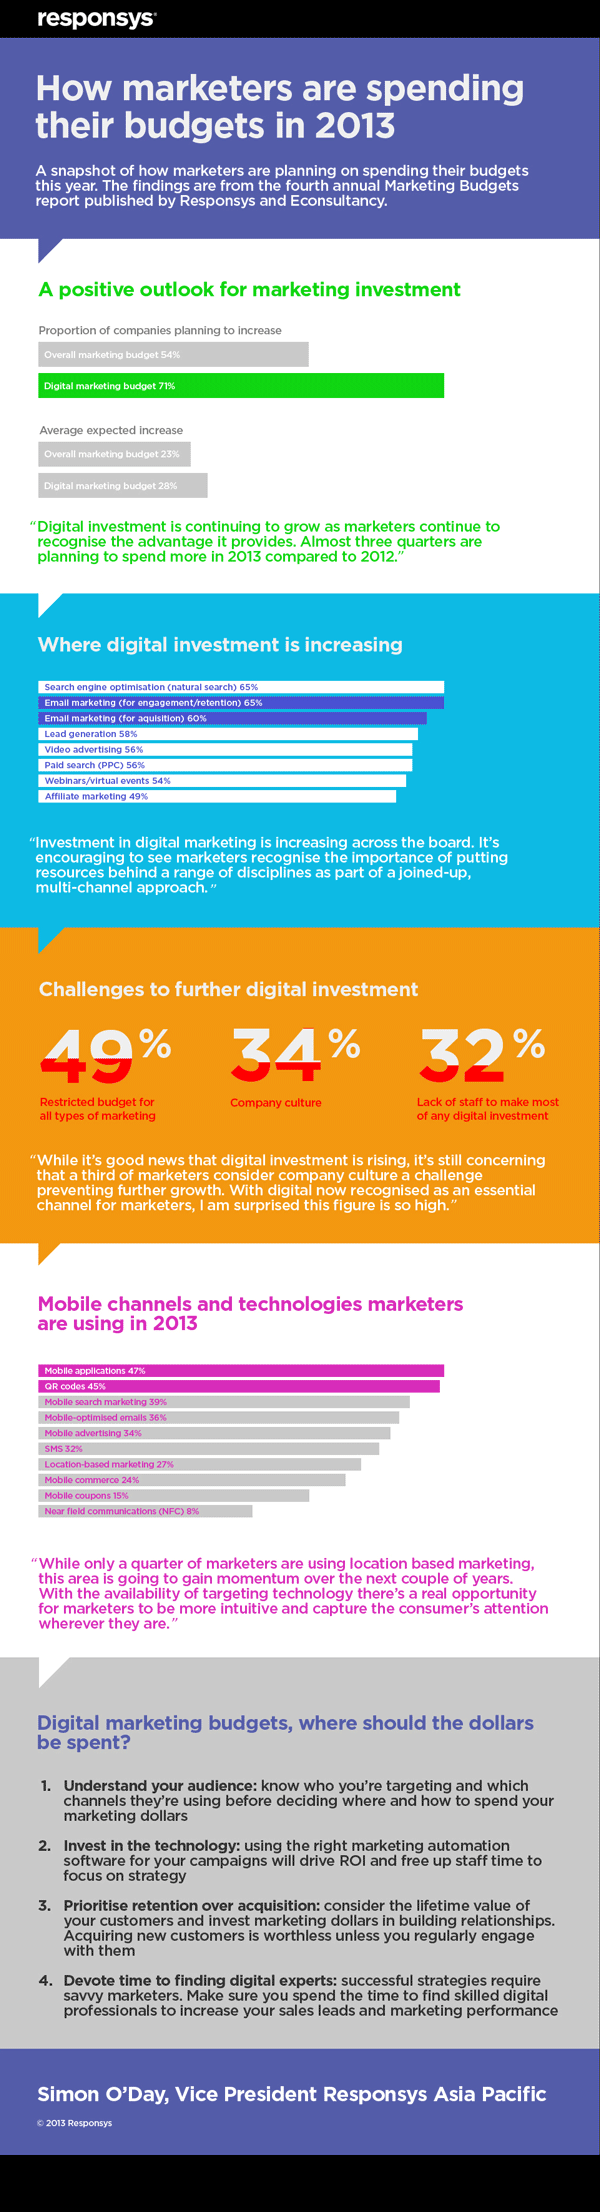 How Are Australian Marketing Budgets Being Spent In 2013?